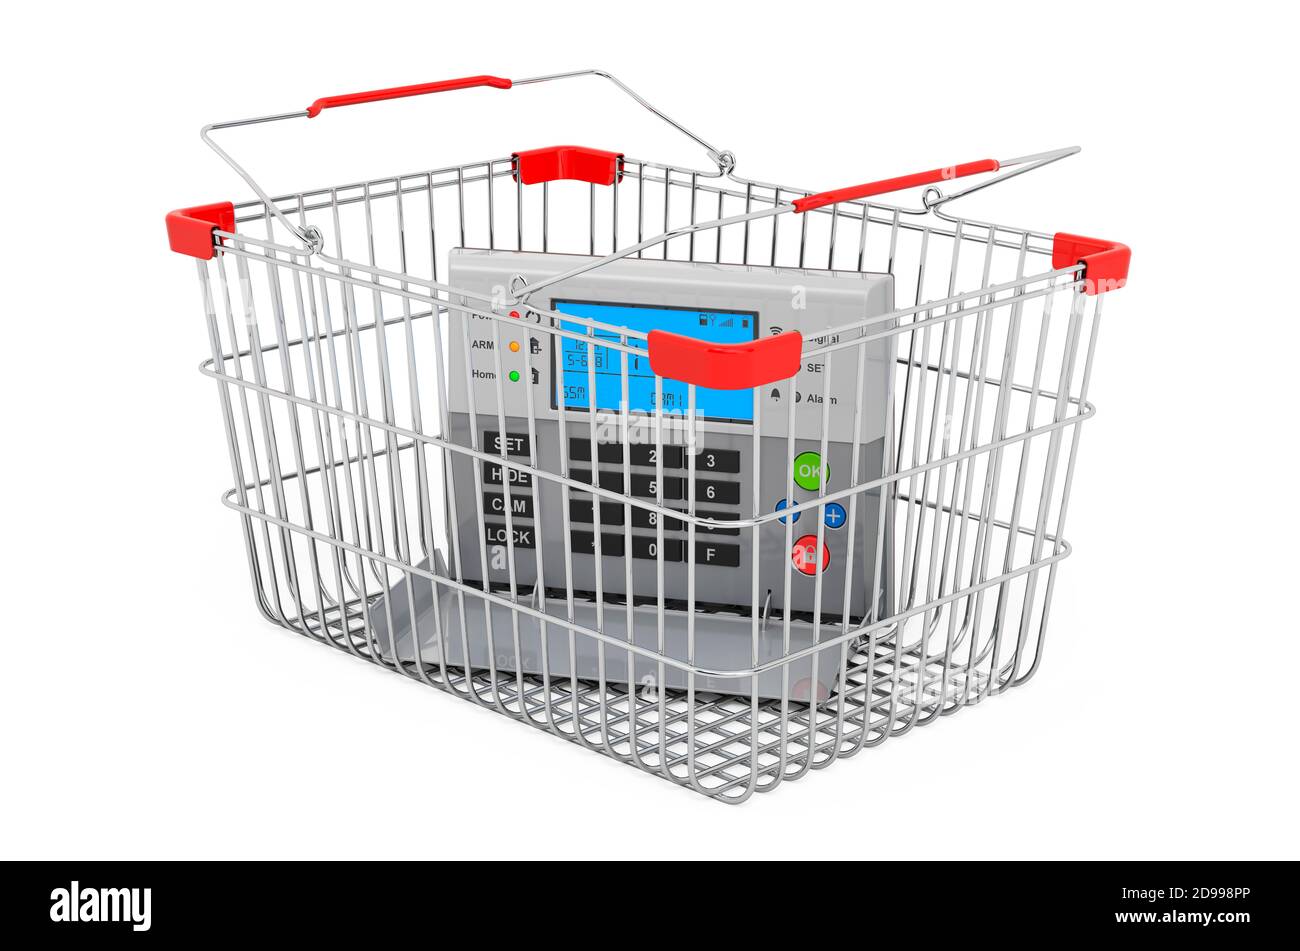 Security alarm system inside shopping basket, 3D rendering isolated on white background Stock Photo